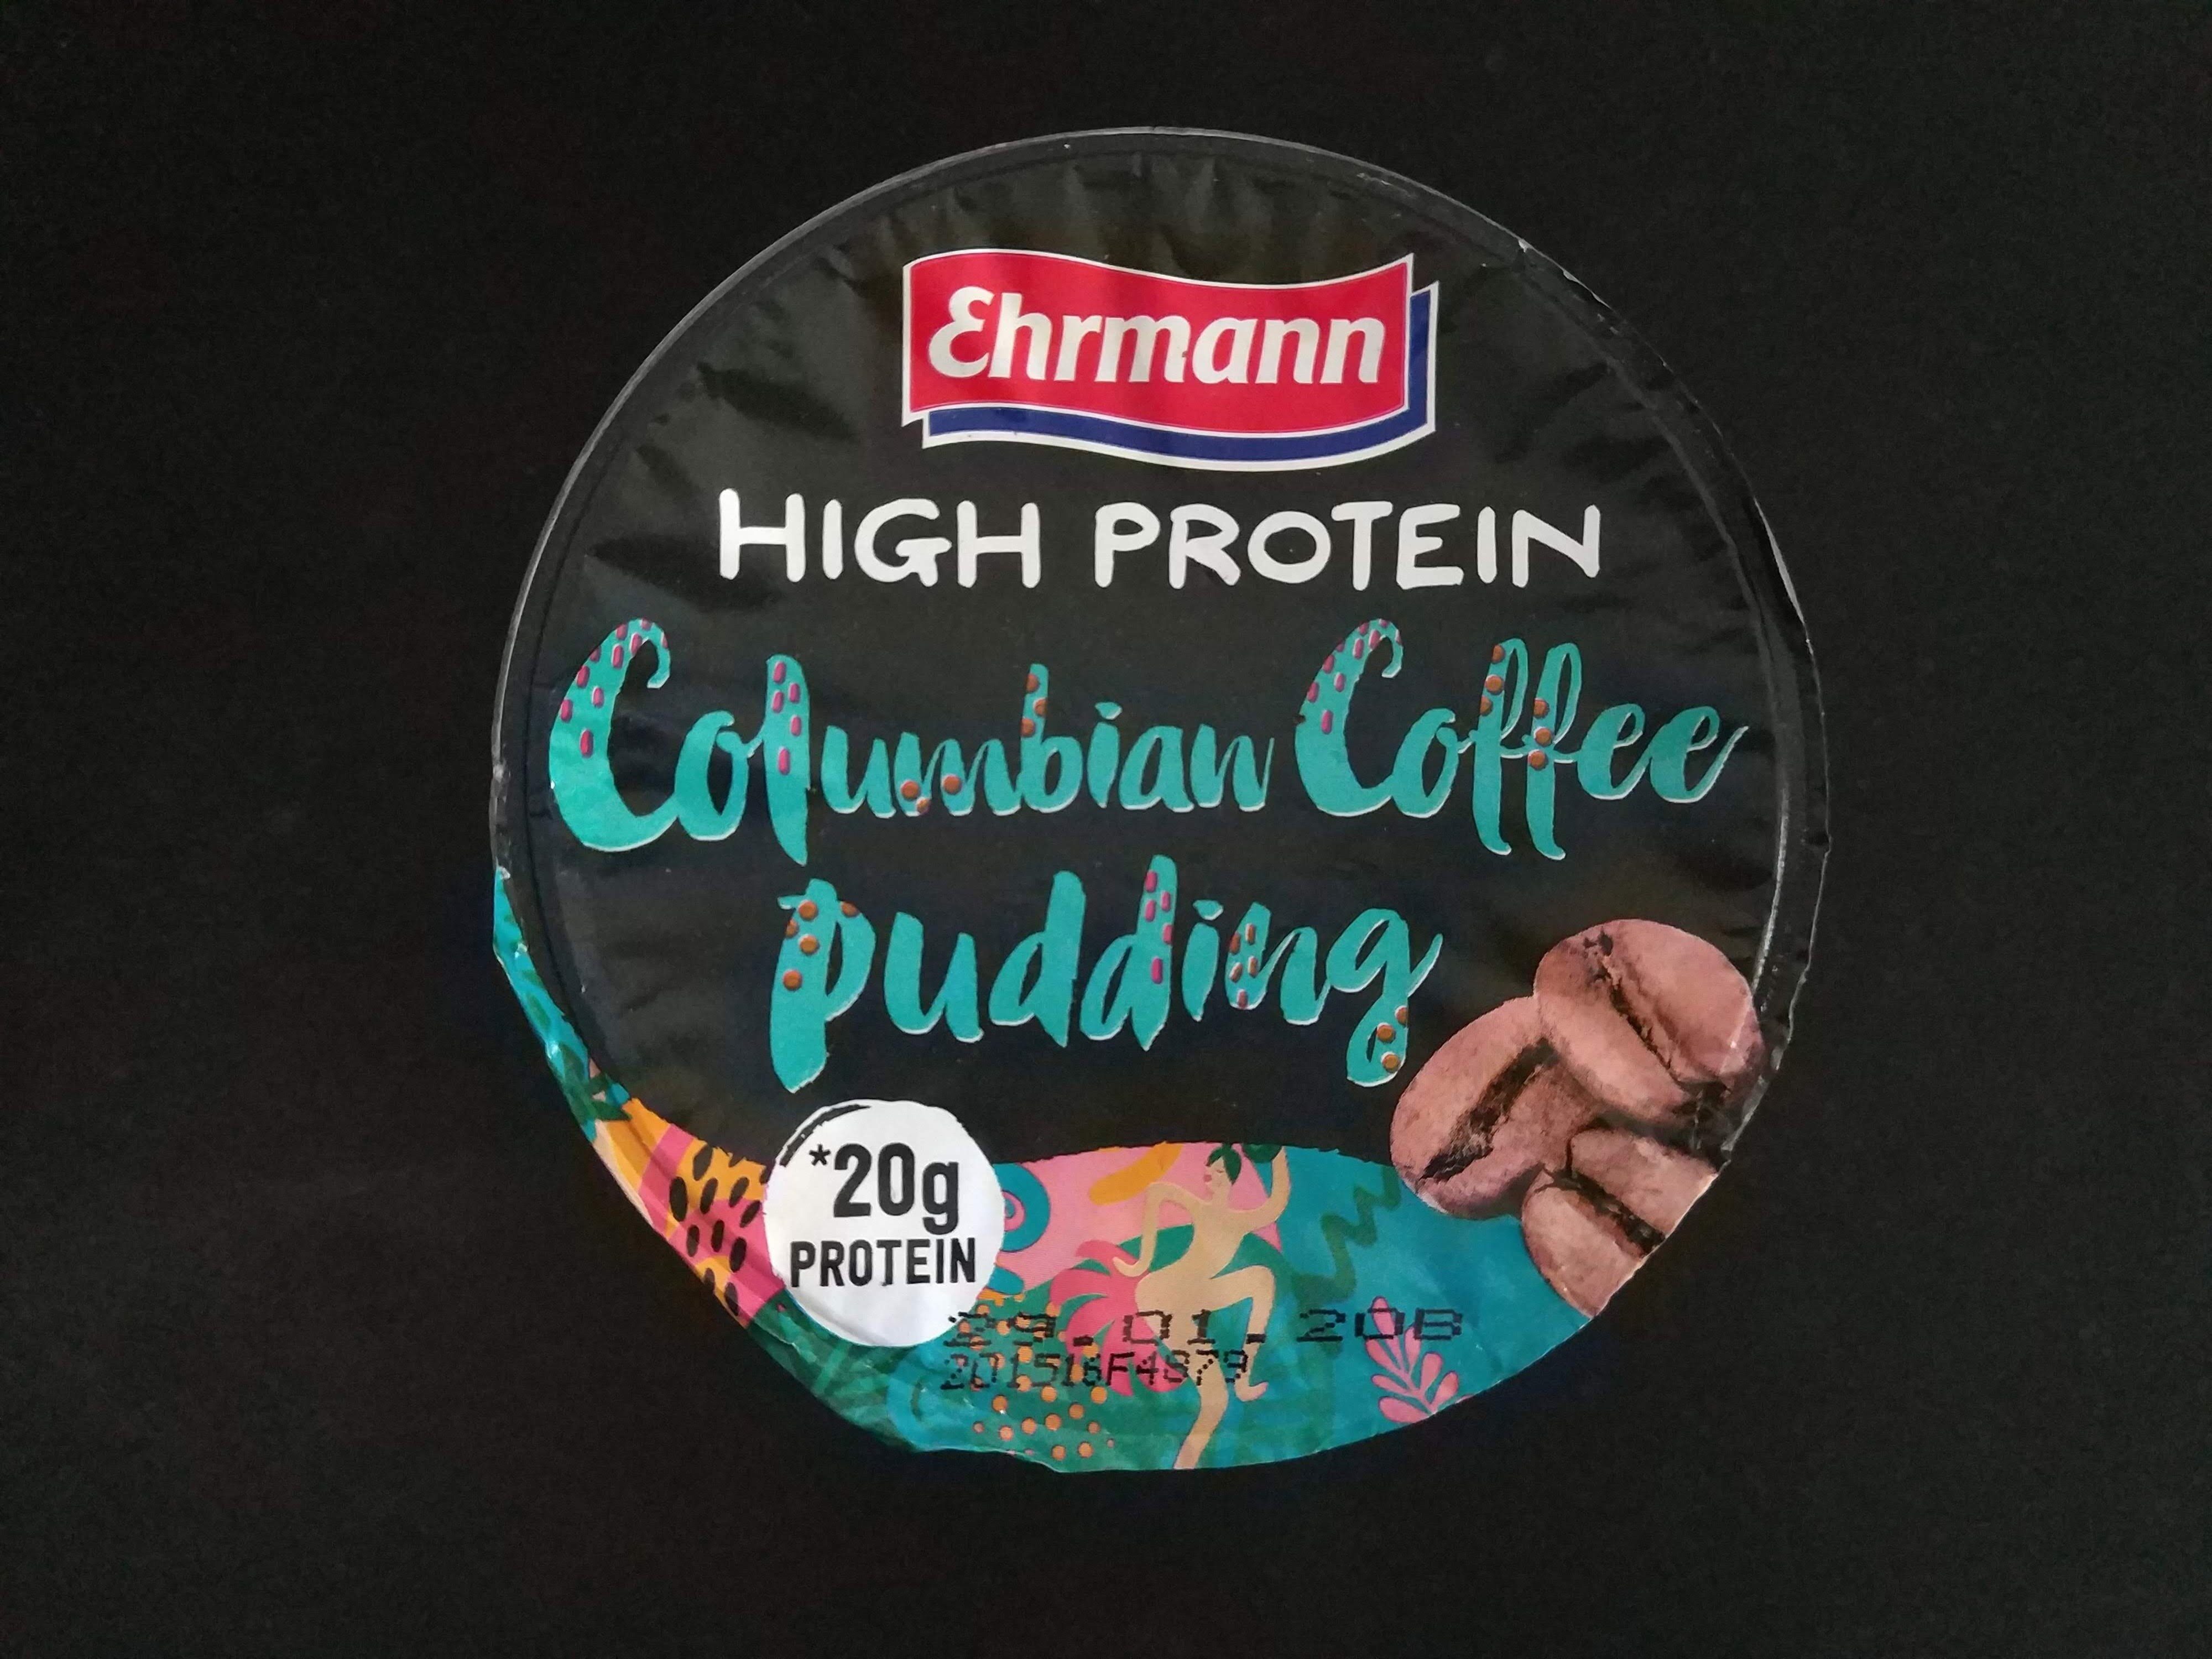 High Protein Columbian Coffee Pudding - Producto